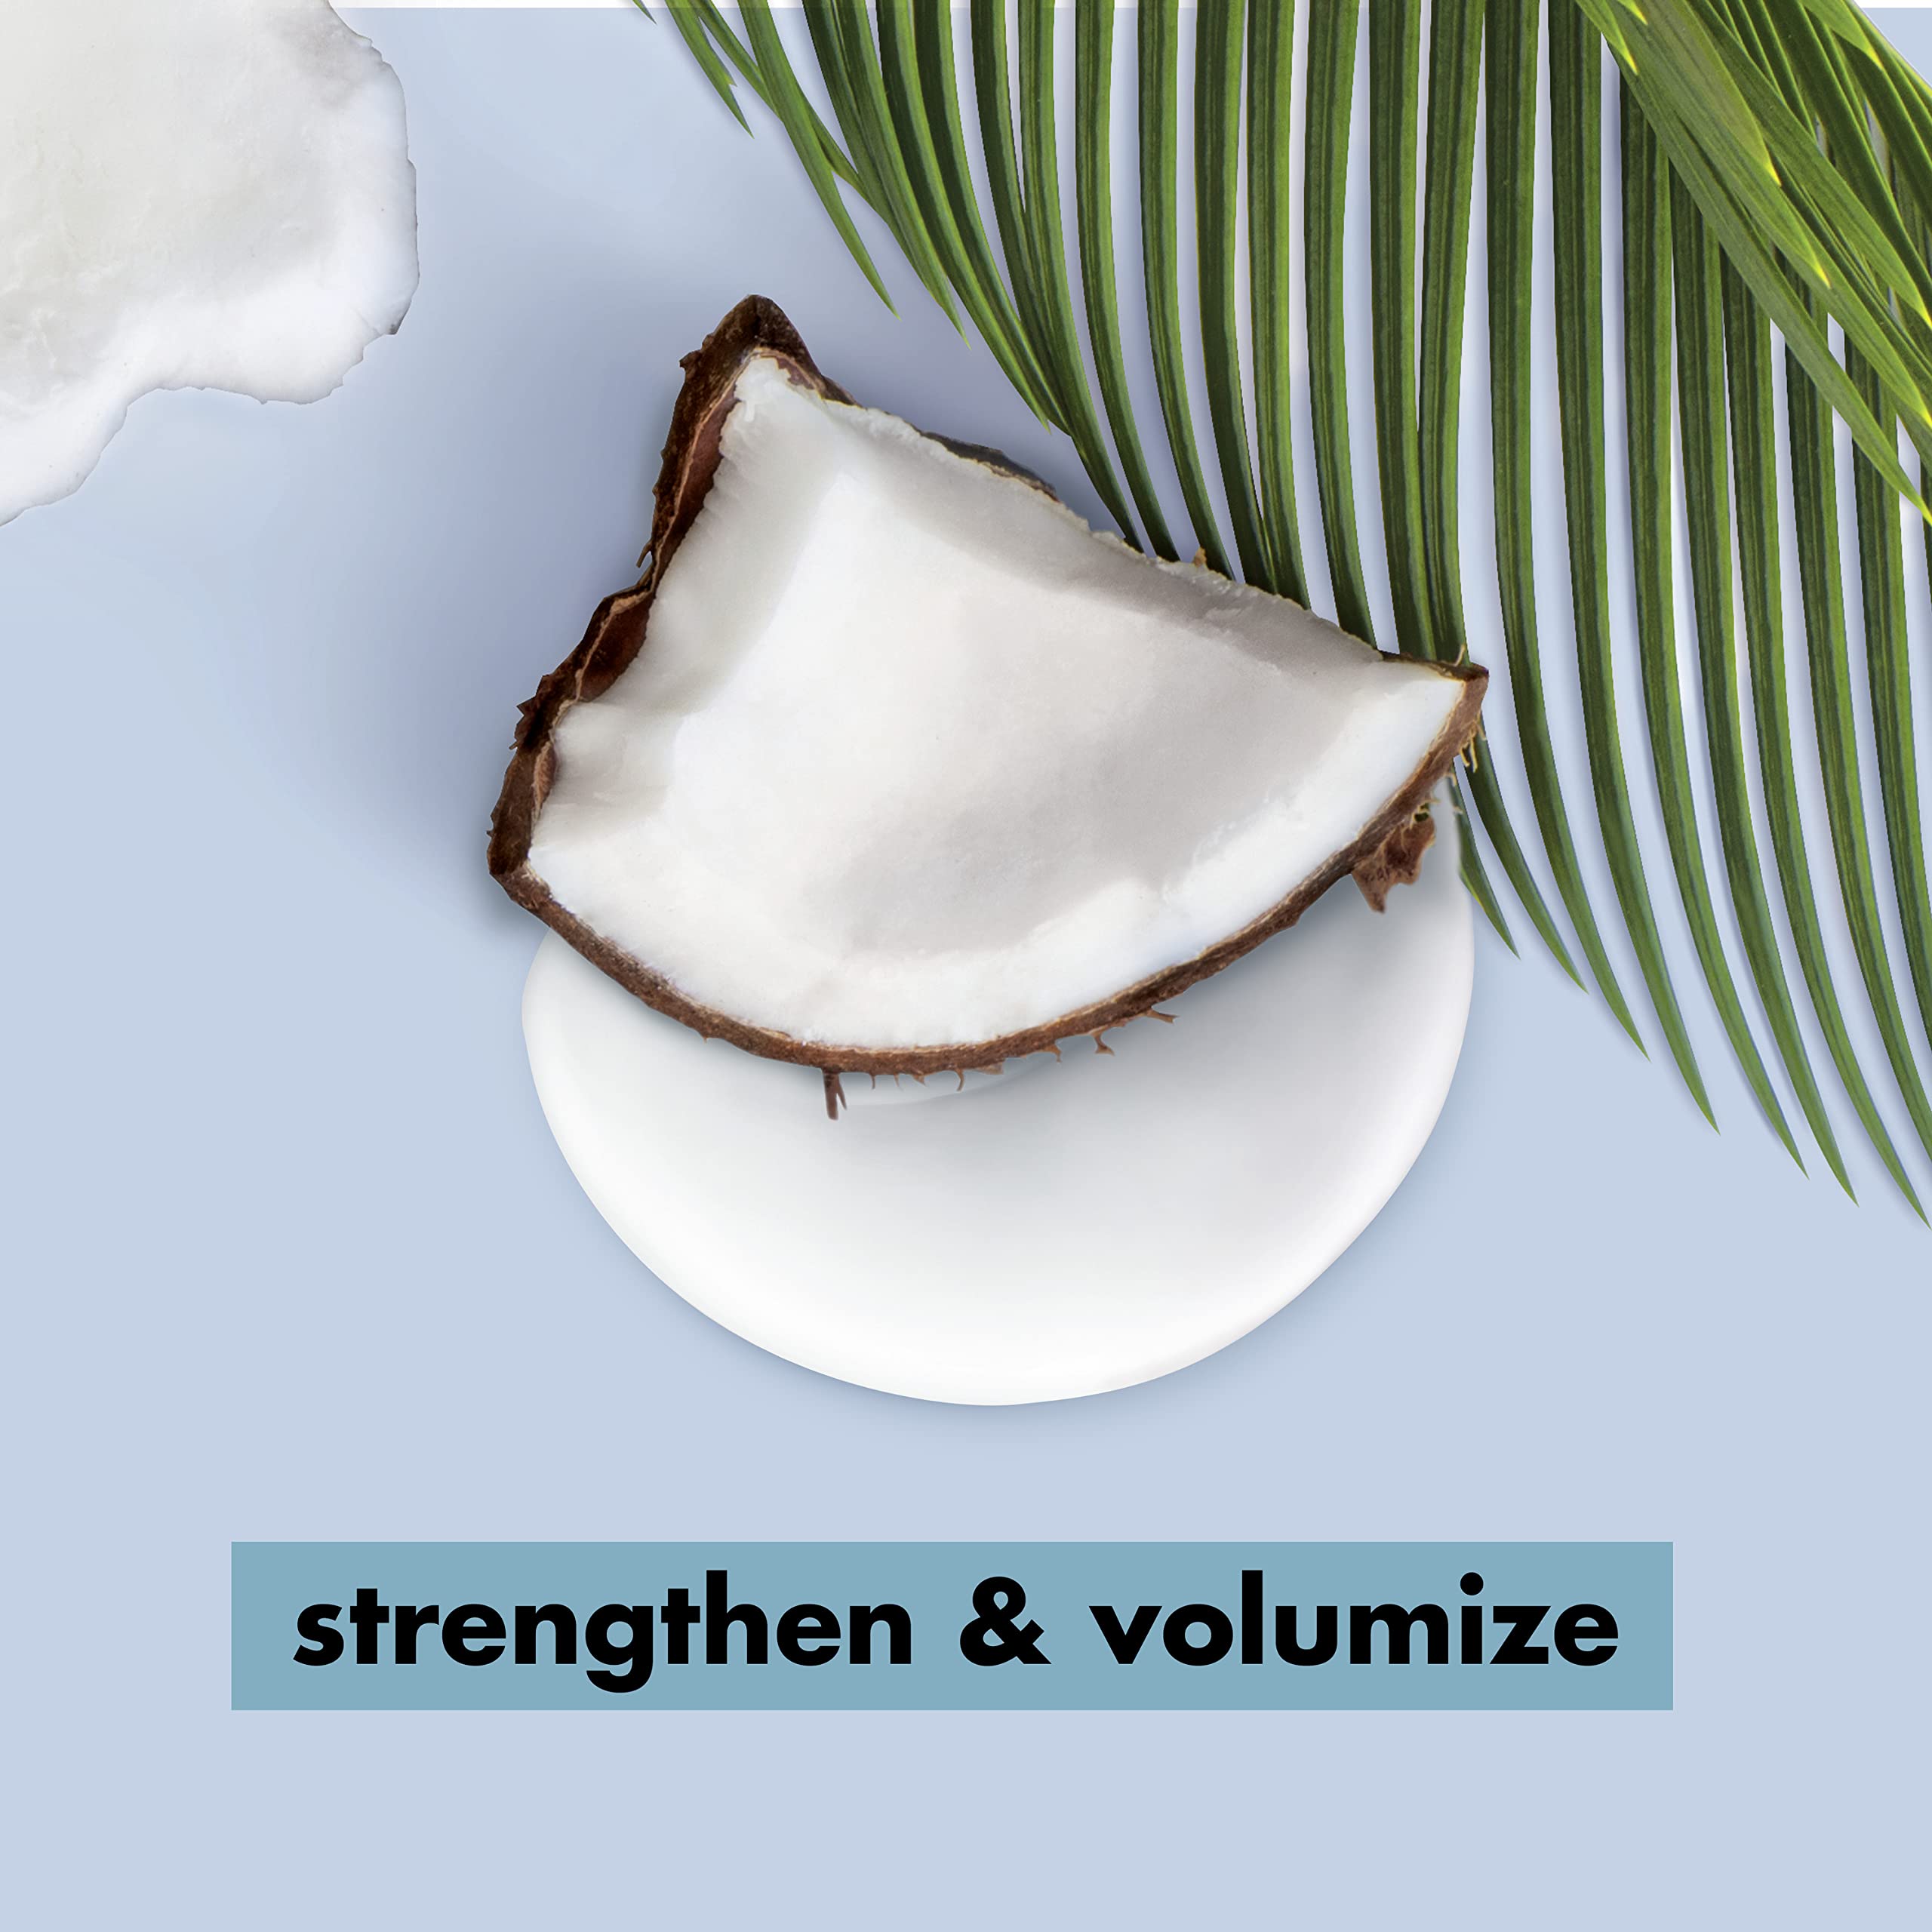 Love Beauty and Planet Volume & Bounty 100% Biodegradable Conditioner For Thin and Fine Hair Care Coconut Water & Mimosa Flower Volumizing Conditioner 0% Silicones, Parabens, and Dyes 13.5 oz